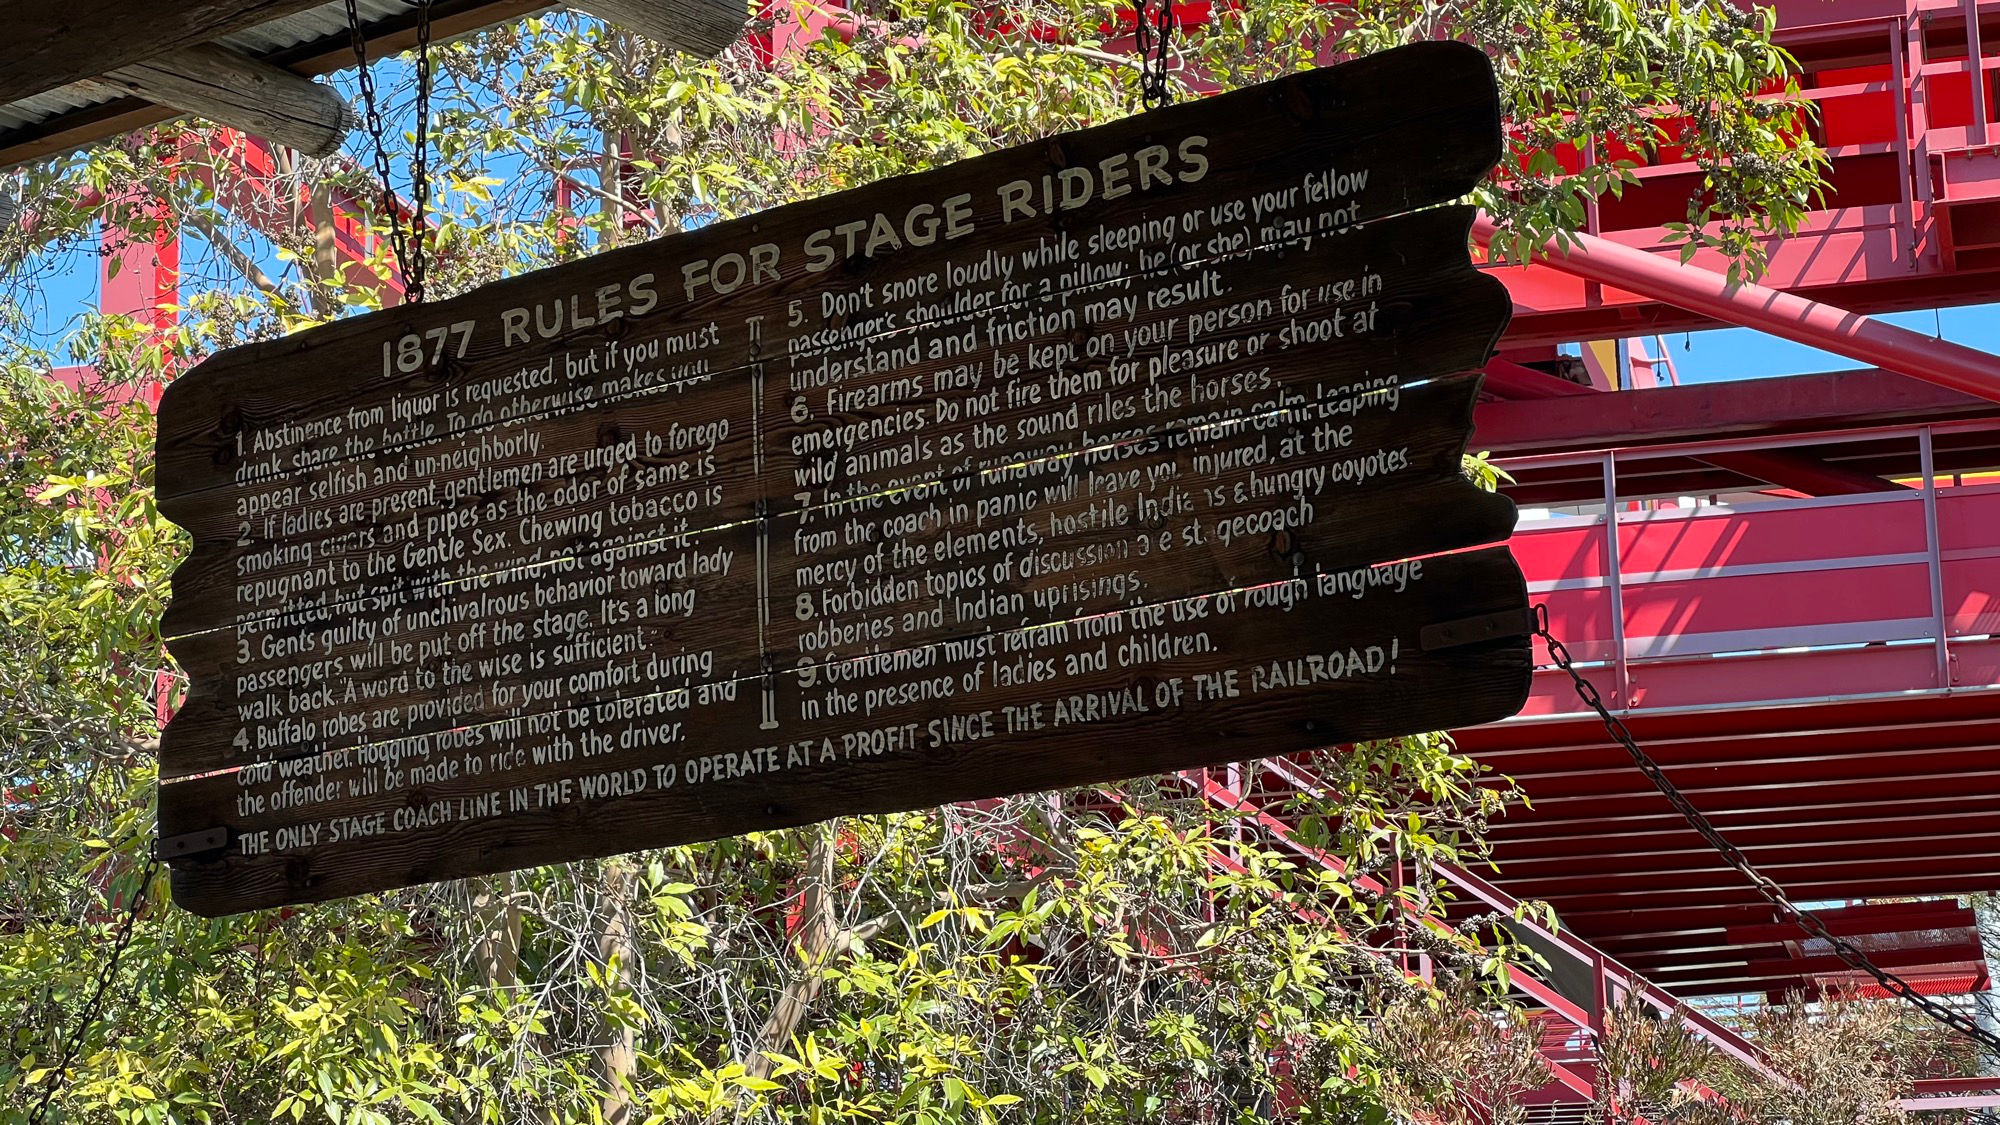 Butterfield Stagecoach 1877 Rules for Stage Riders